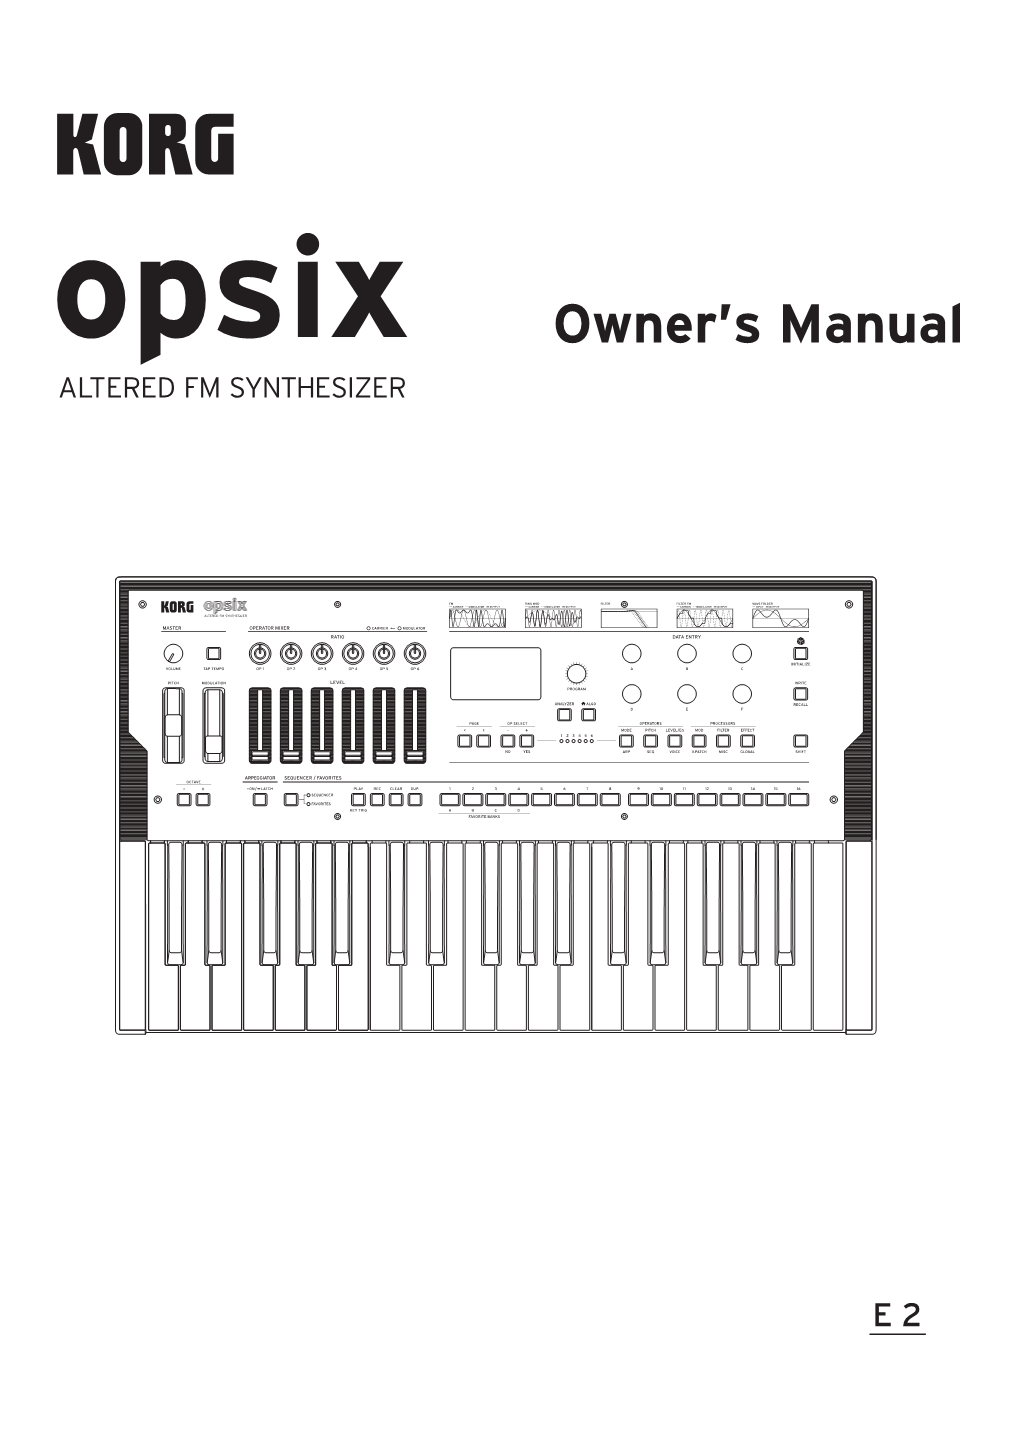 Opsix Owner's Manual